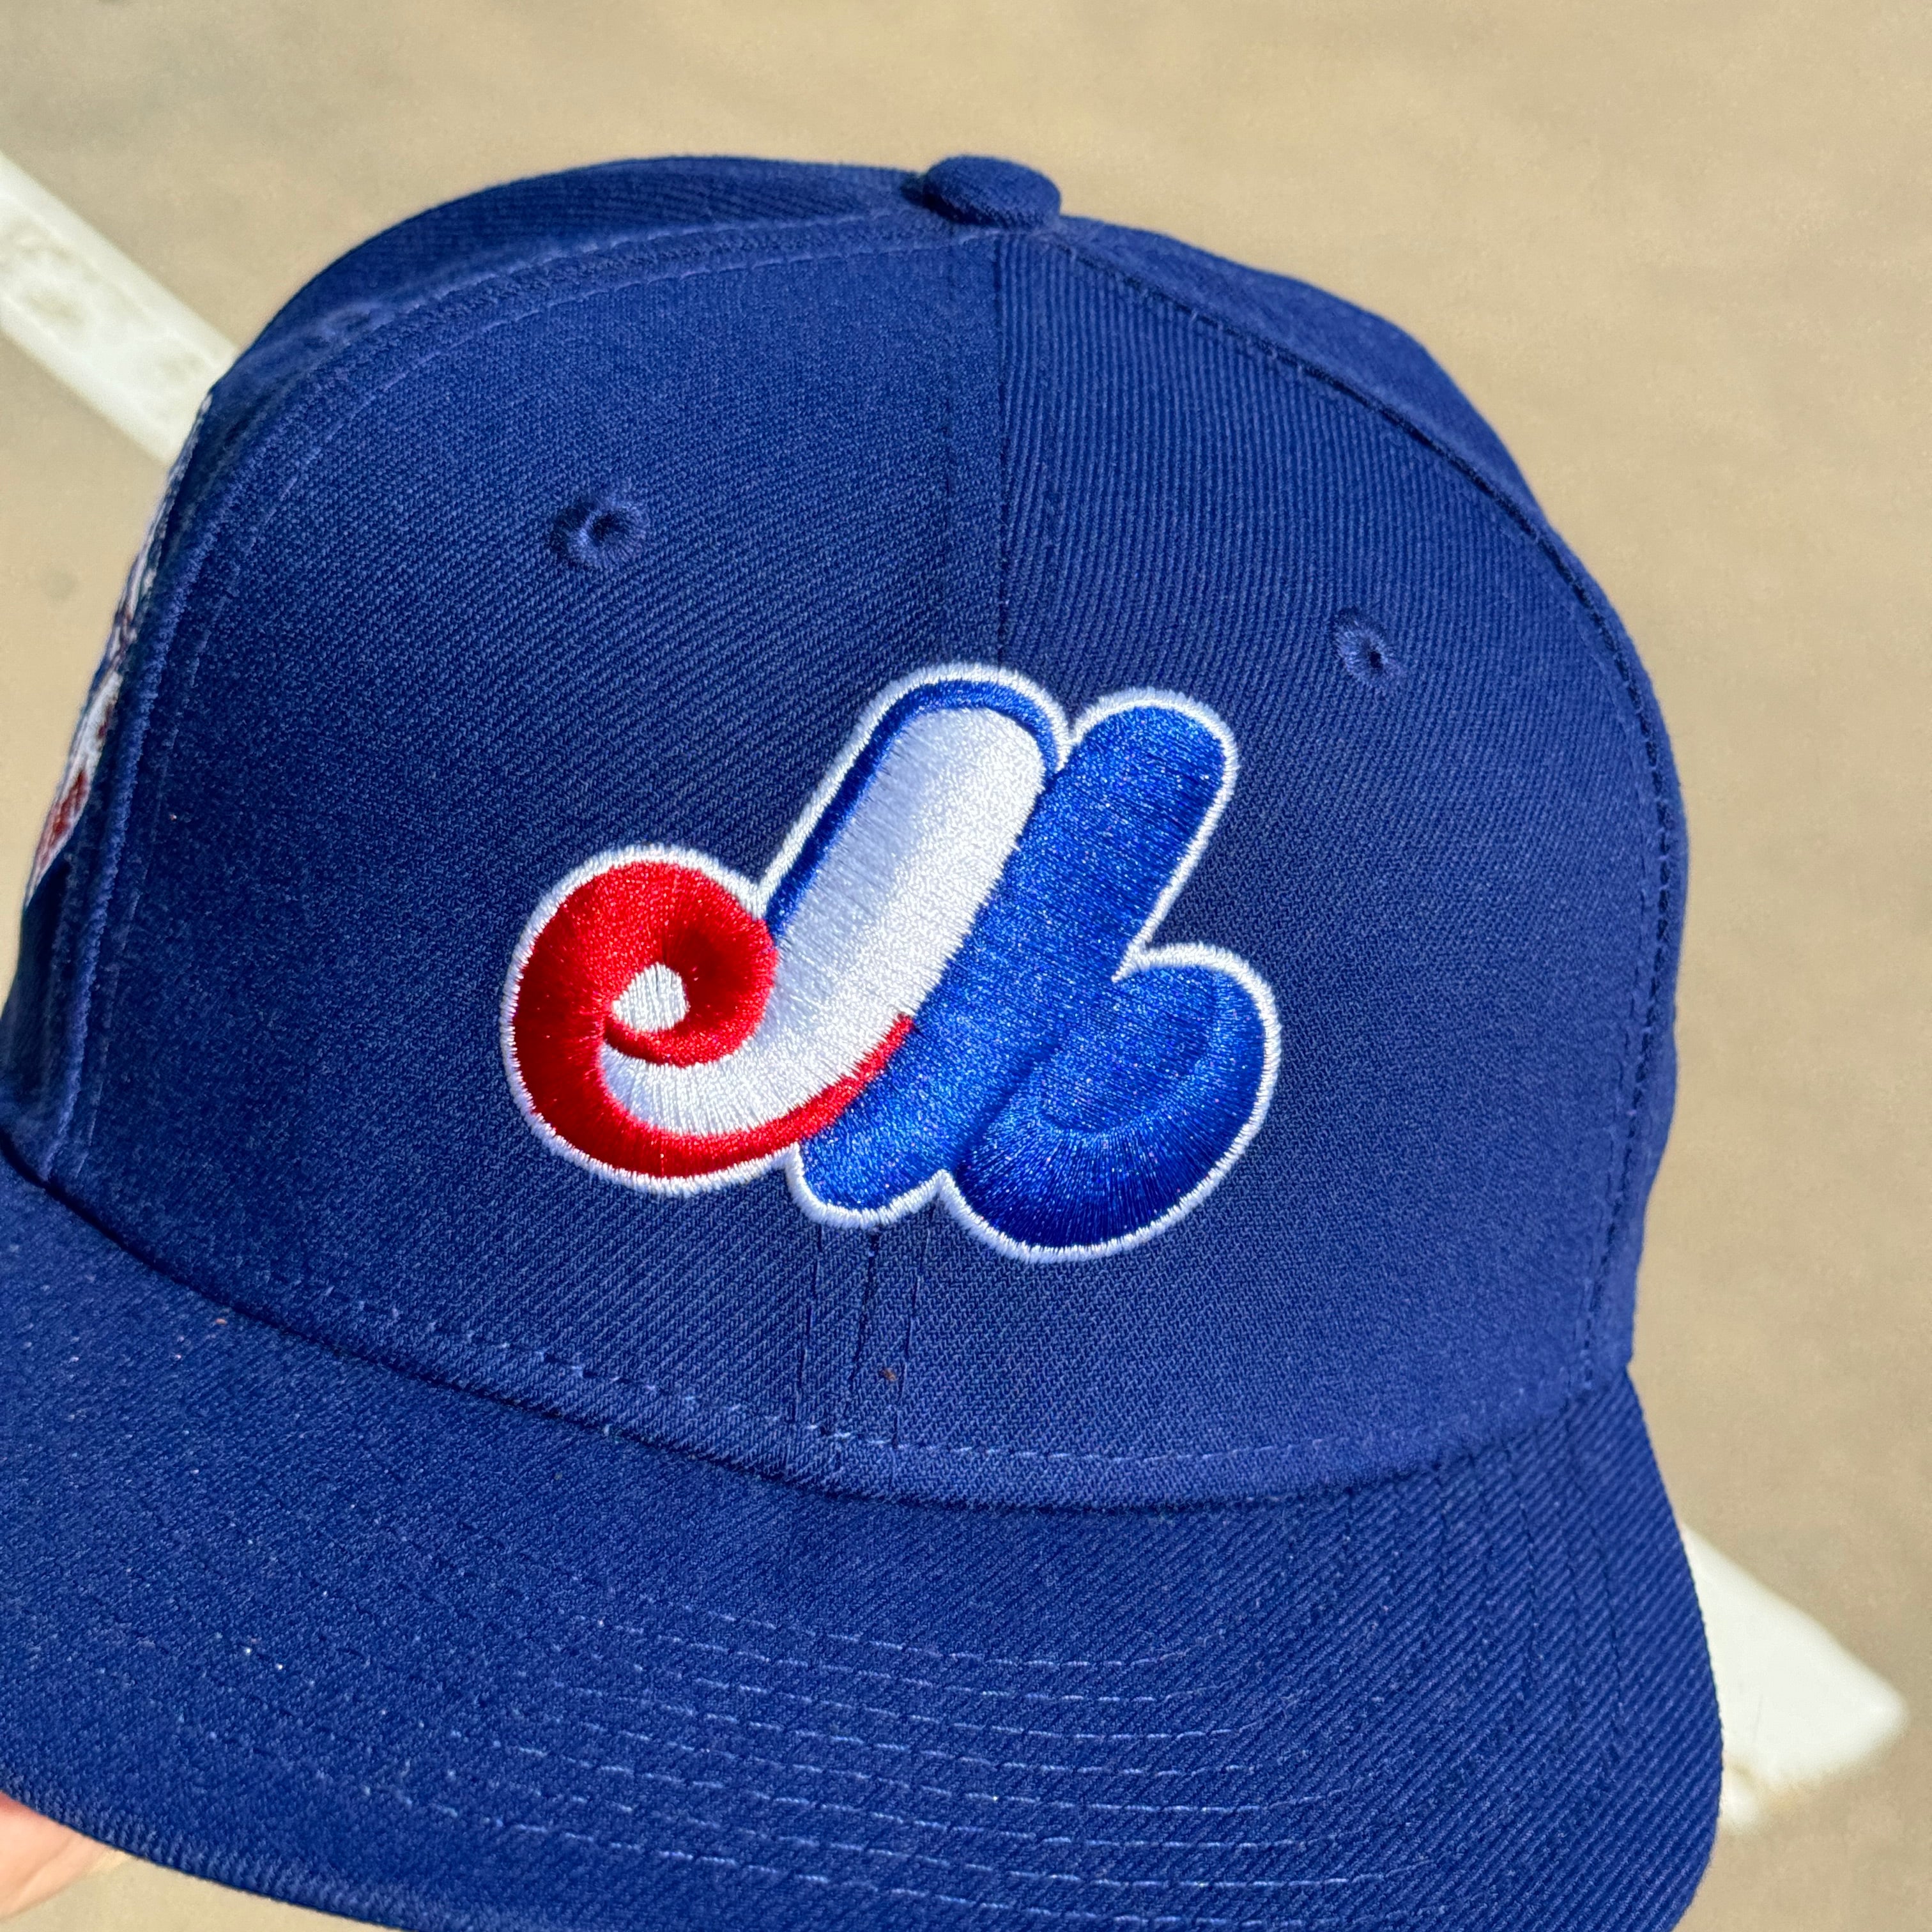 USED 1/8 Blue Montreal Toronto Expos 1982 All Star Game 59fifty New Era Fitted Hat Cap